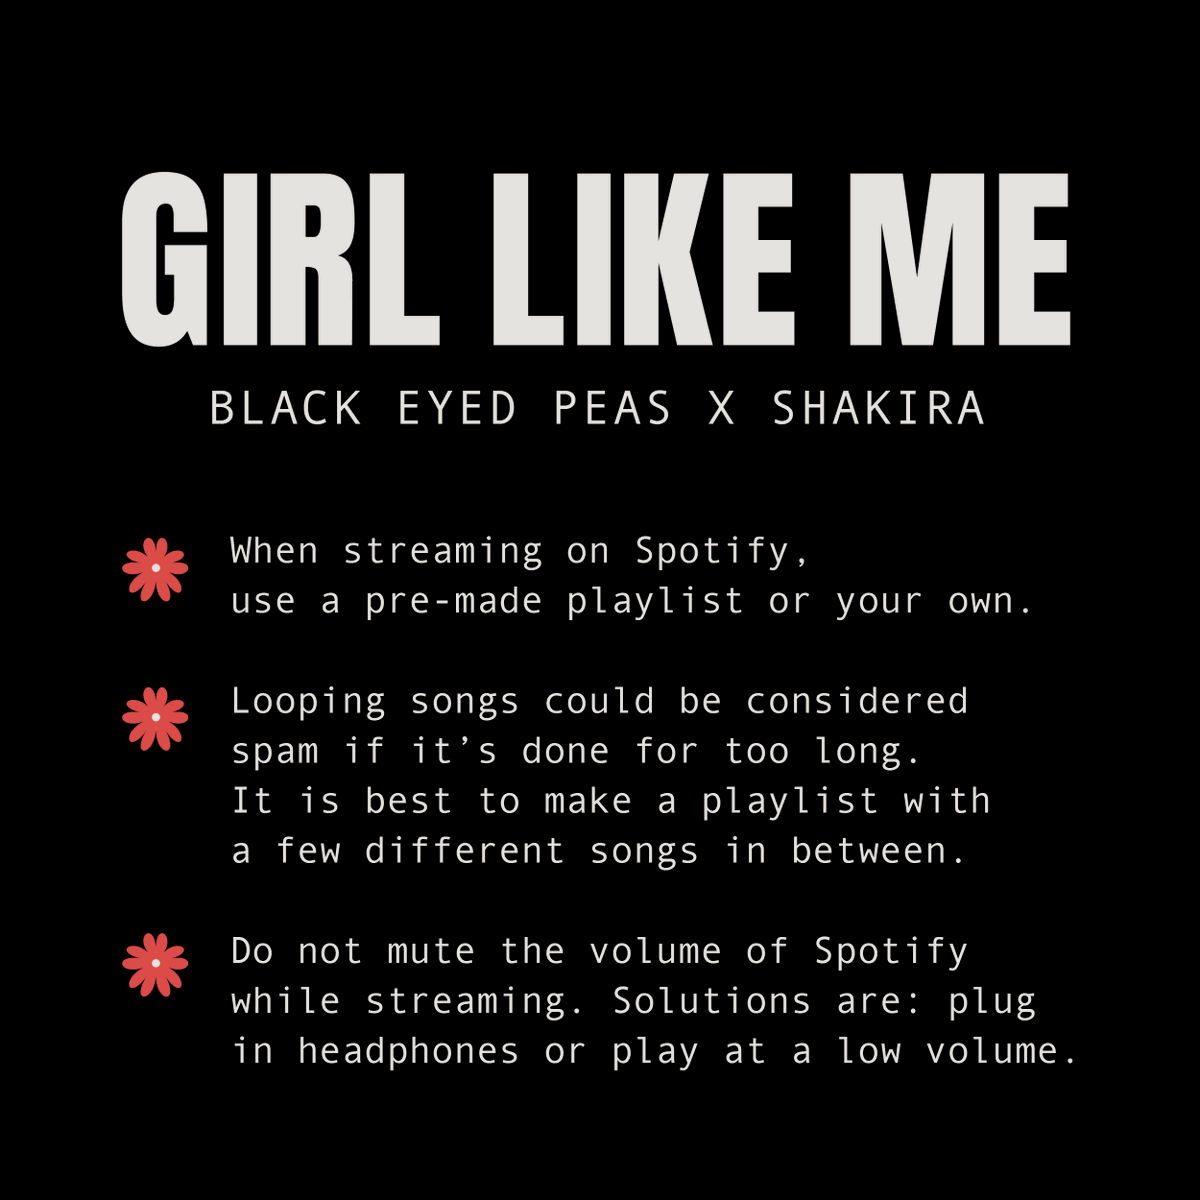 shakirastuff - “Girl Like Me” by Black Eyed Peas and Shakira will be released on Friday, June 19 as part of the group's new album